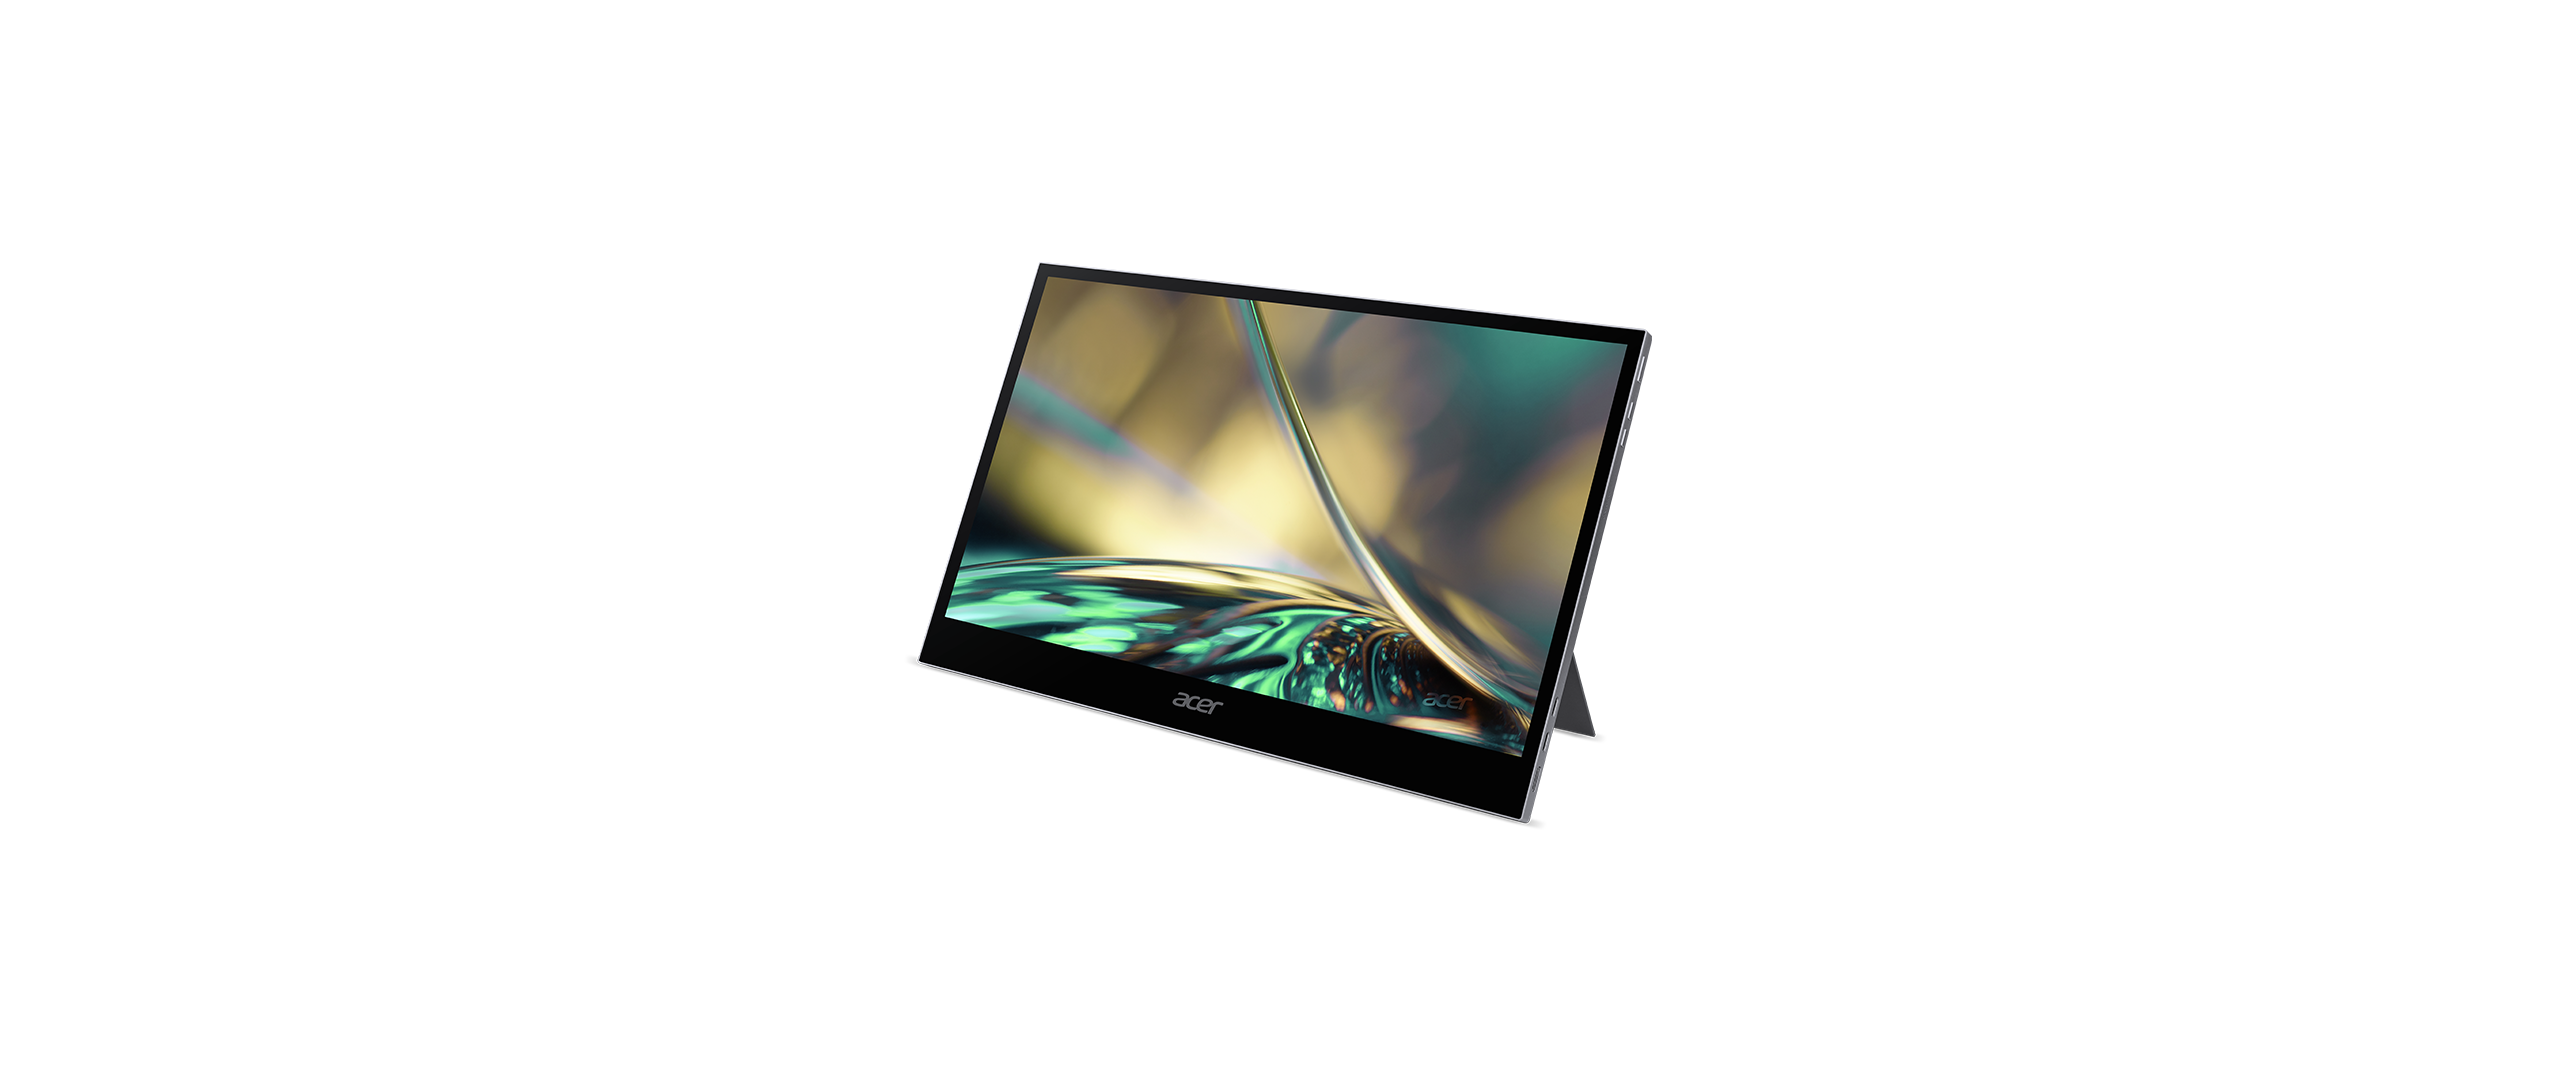 acer-monitor-pm8-banner-l